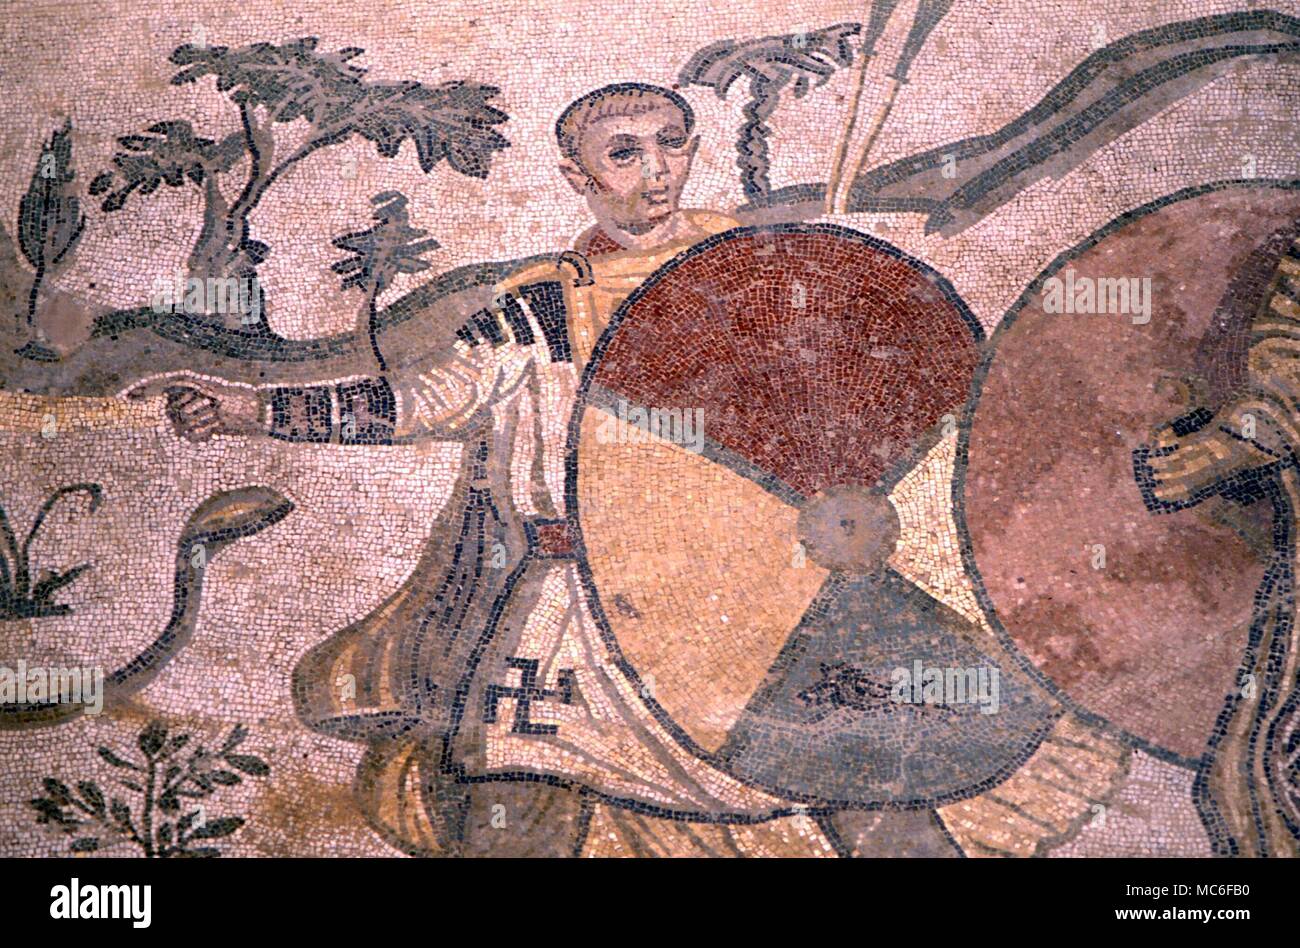 SWASTIKA Swastika symbol on tunic of man with large shield. Roman mosaics of the 3rd century AD, in the vast Roman Villa at Casale, near Piazza Armerina. This is one of the finest relics of the Roman Age Stock Photo